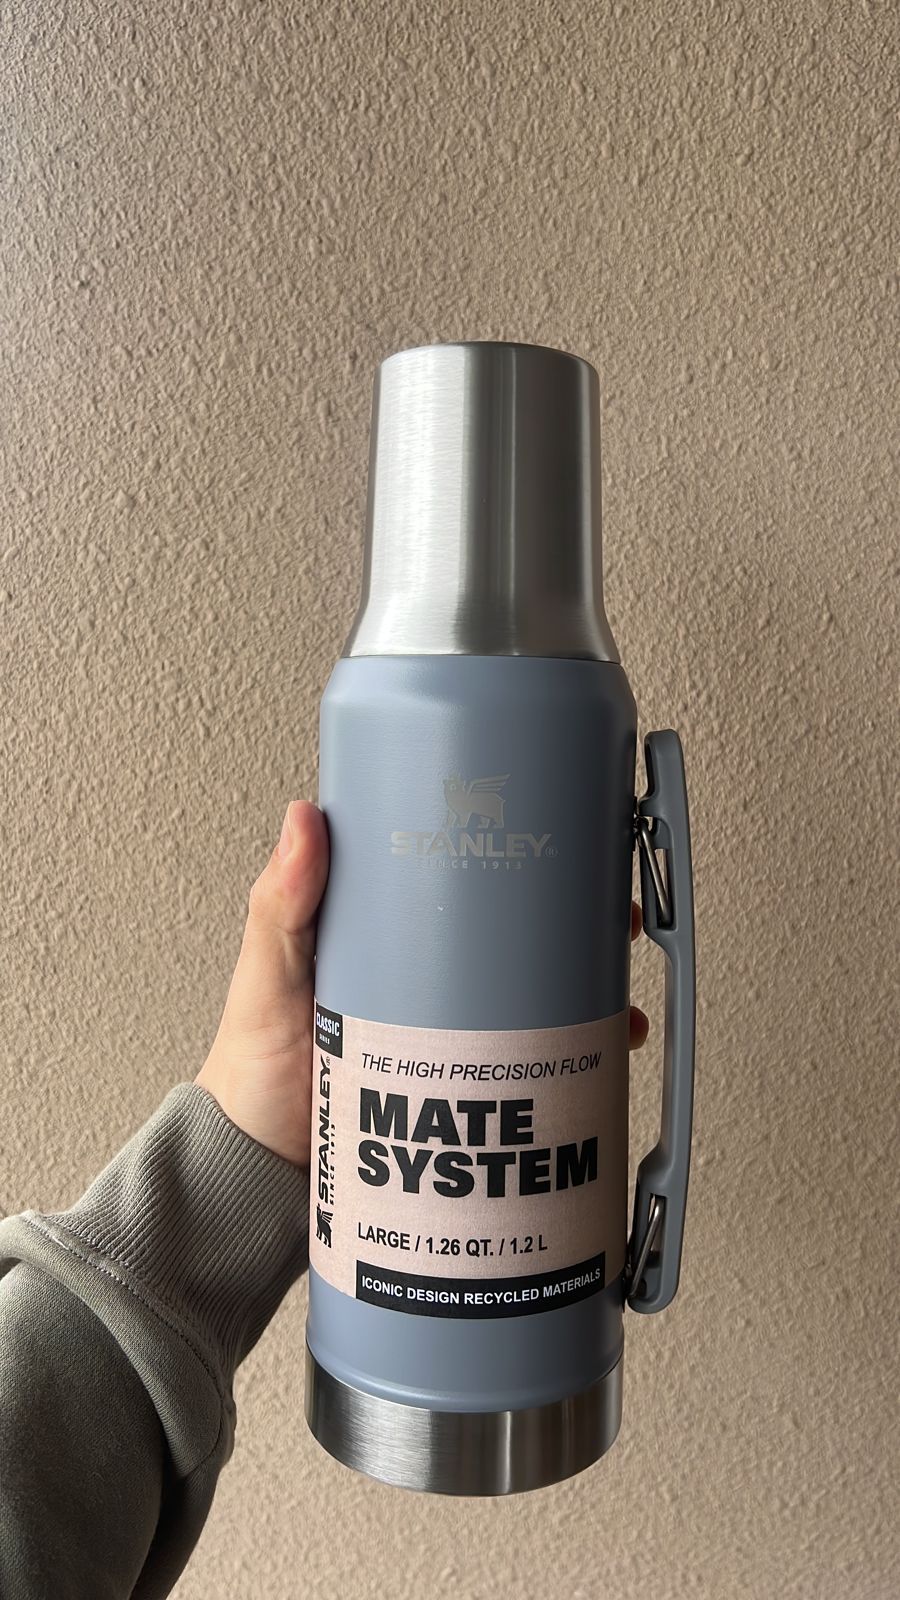 MATE SYSTEM - Termo 2 en 1